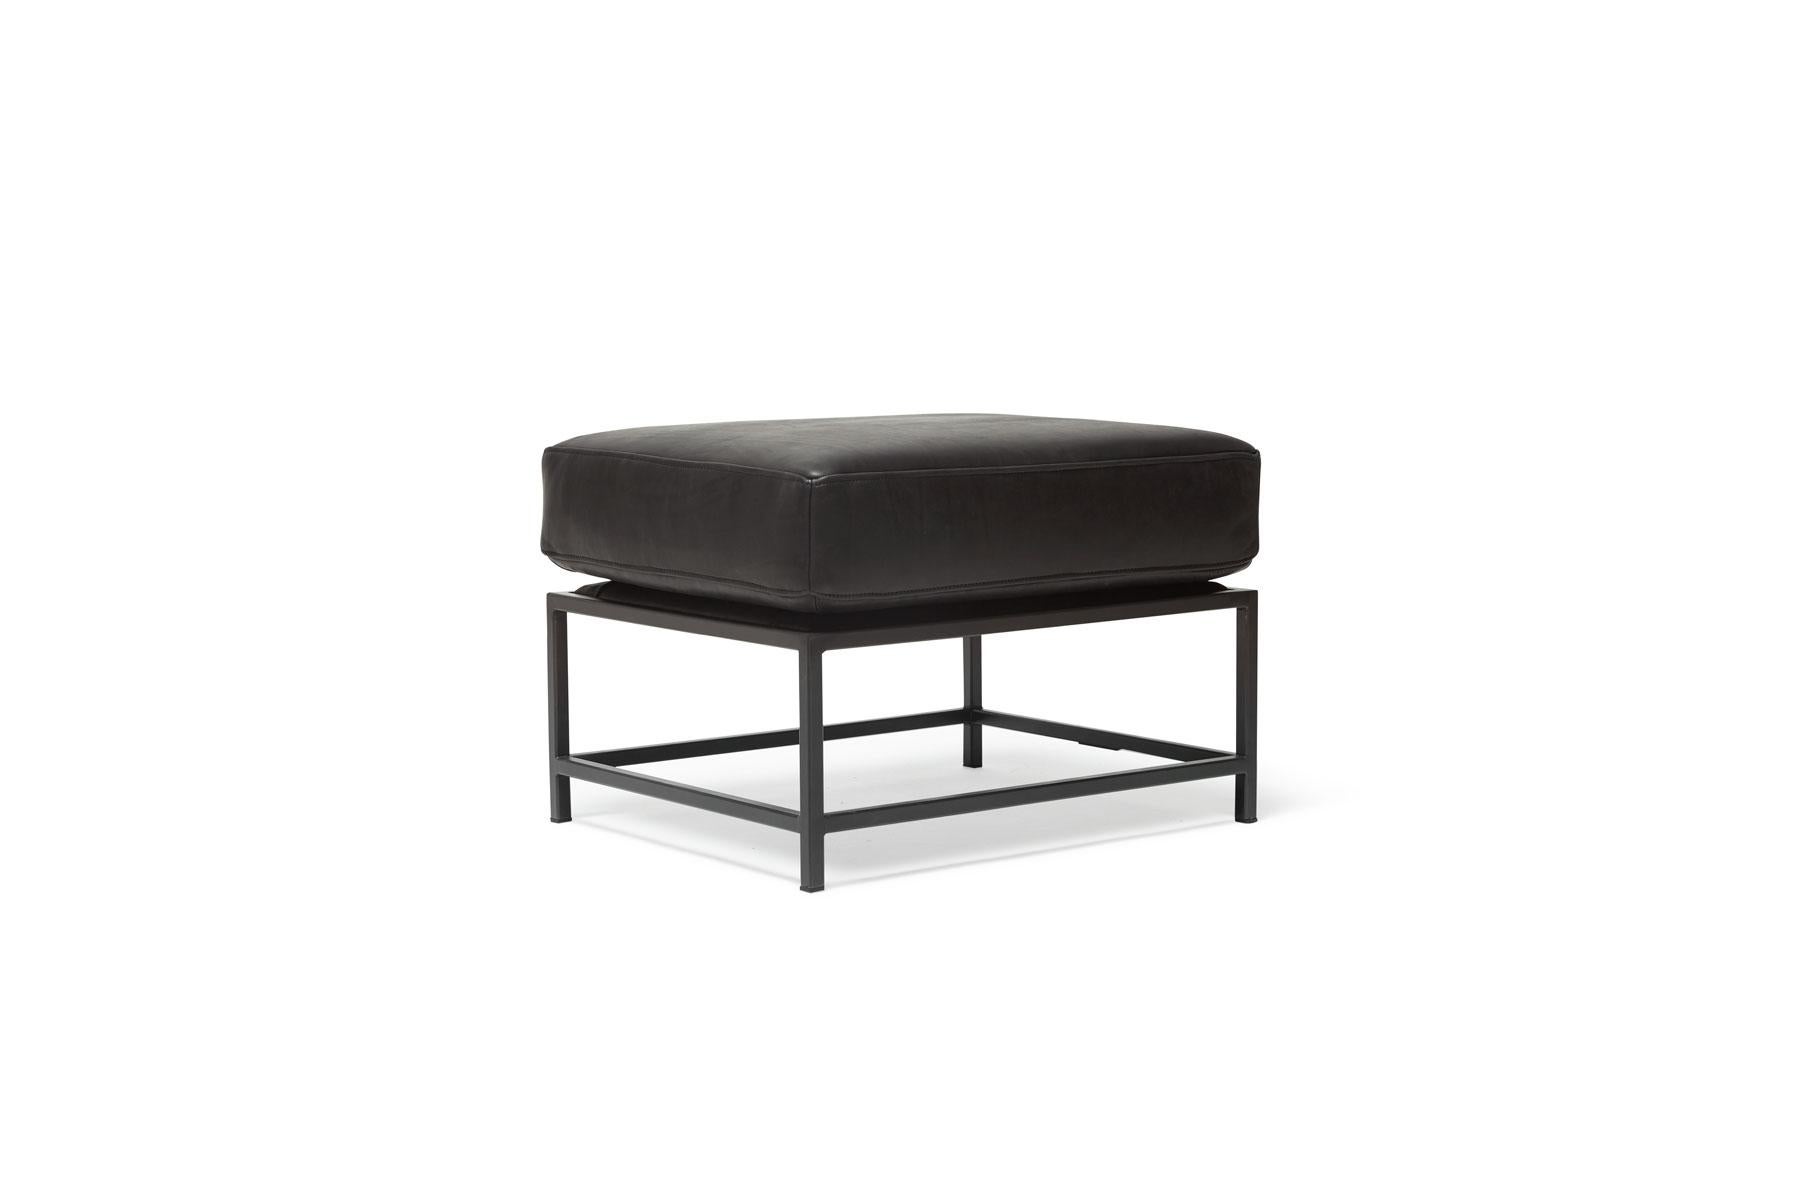 Designed to pair with any of the seating options in Stephen Kenn's Inheritance Collection, the ottoman is a great way to add a lounge element to your seating arrangement for maximum comfort.

This variation is upholstered in a soft, deep black